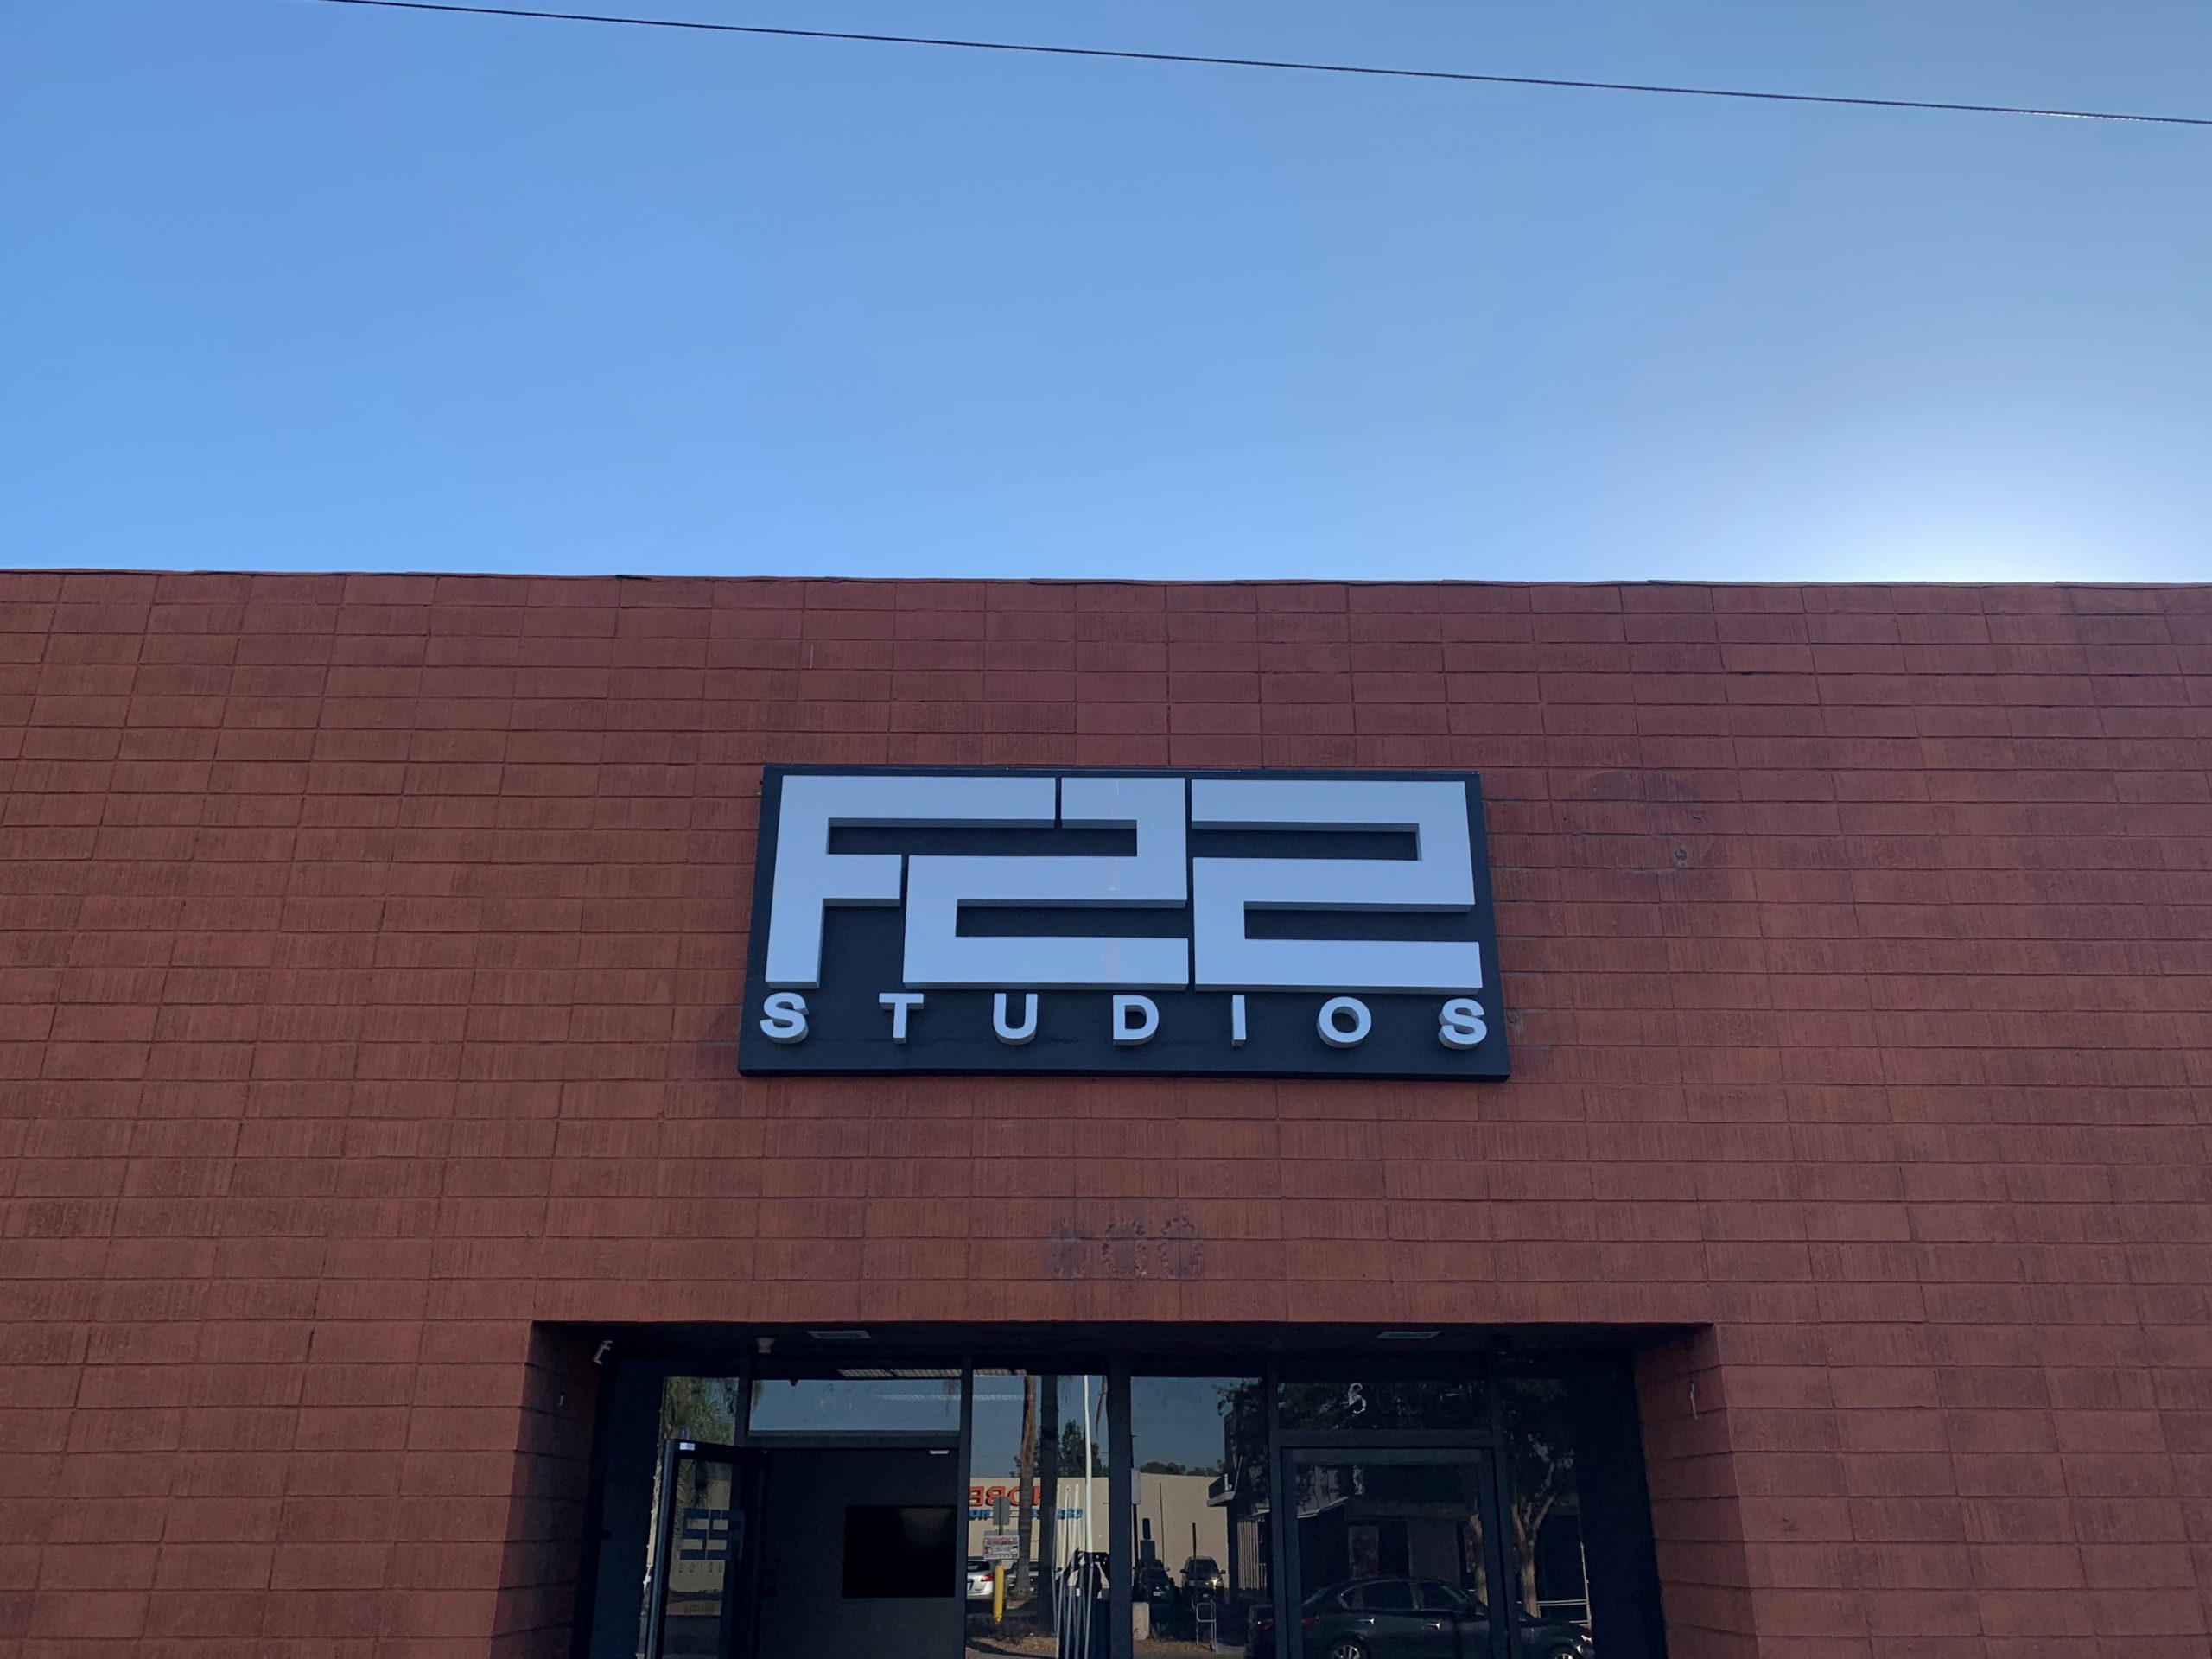 You are currently viewing Building Channel Letters for F22 Studios in Burbank